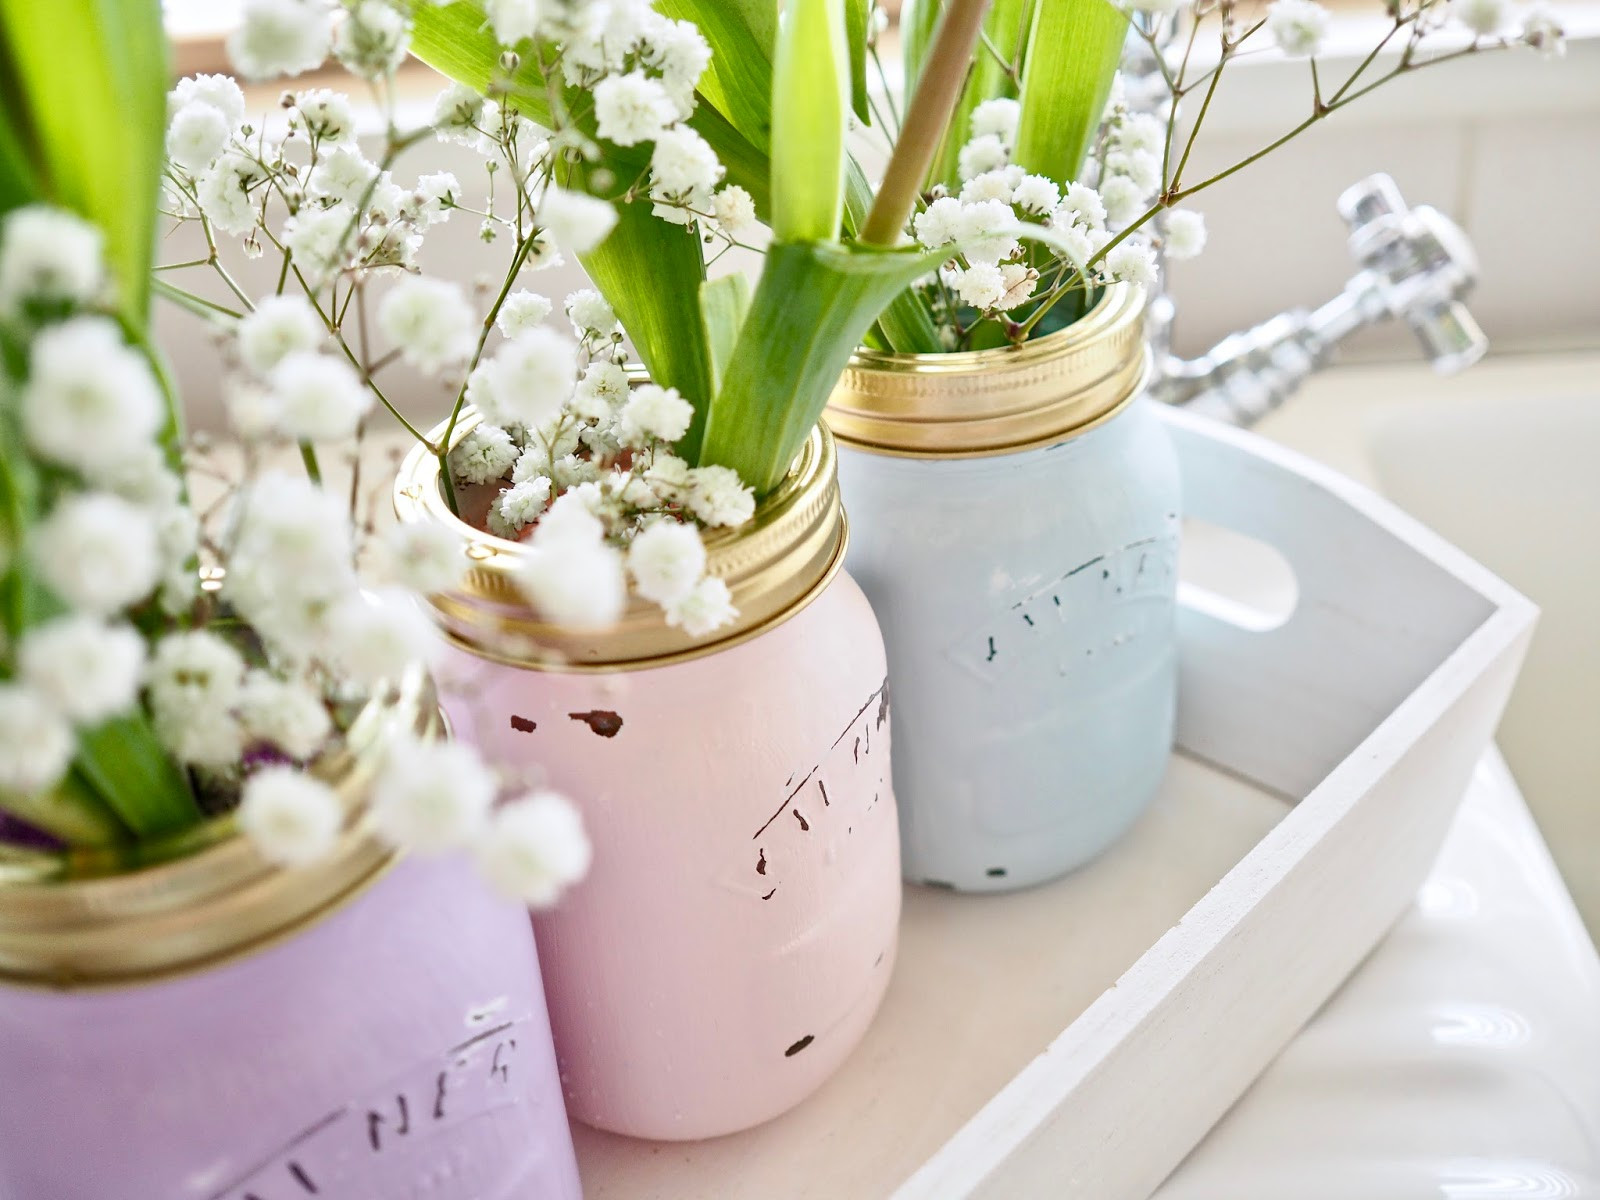 23 Fabulous Artificial Flowers In Vase Marks and Spencer 2024 free download artificial flowers in vase marks and spencer of videomothers day diy gifts using chalk paint and jars the regarding upcycled mason jars